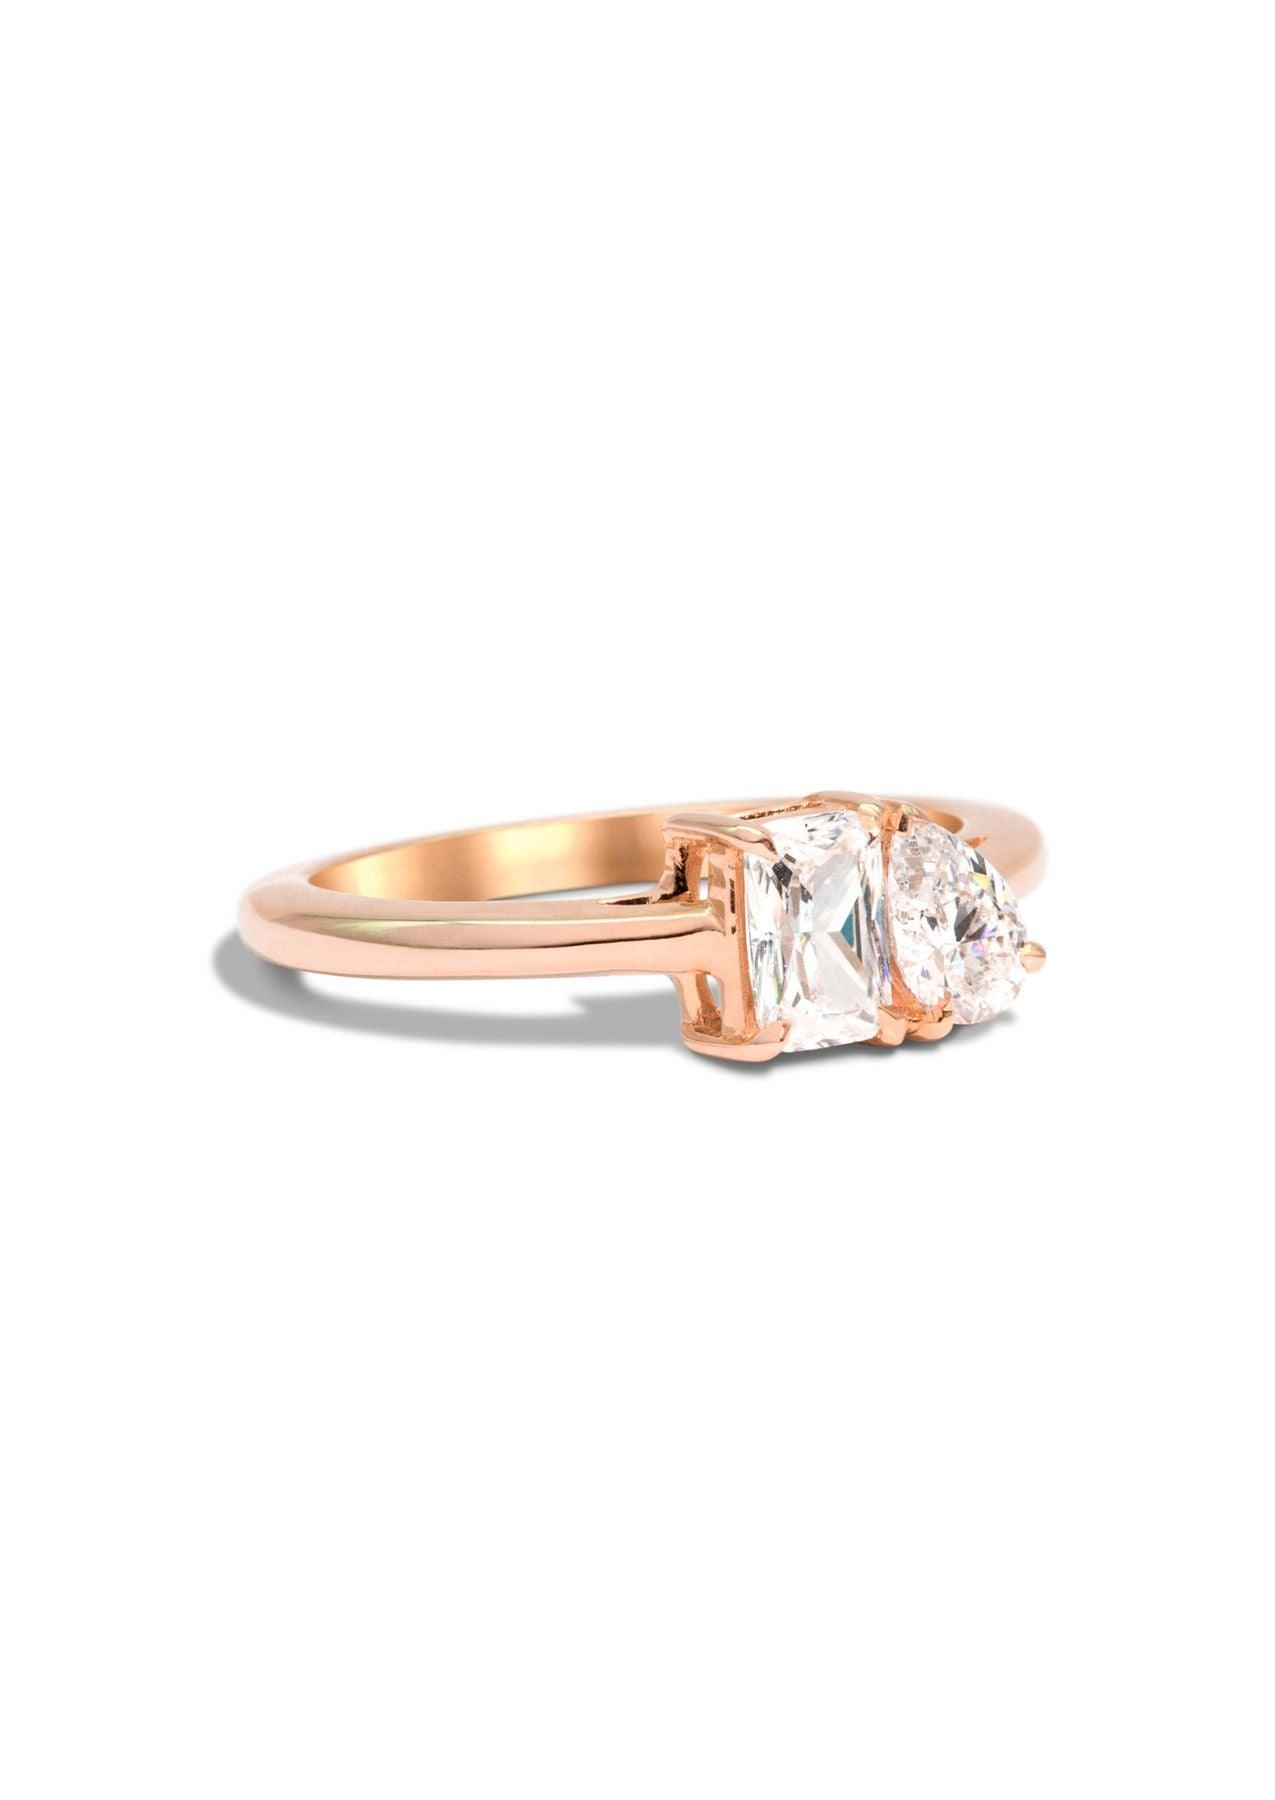 The Toi Et Moi Rose Gold Cultured Diamond Ring - Molten Store